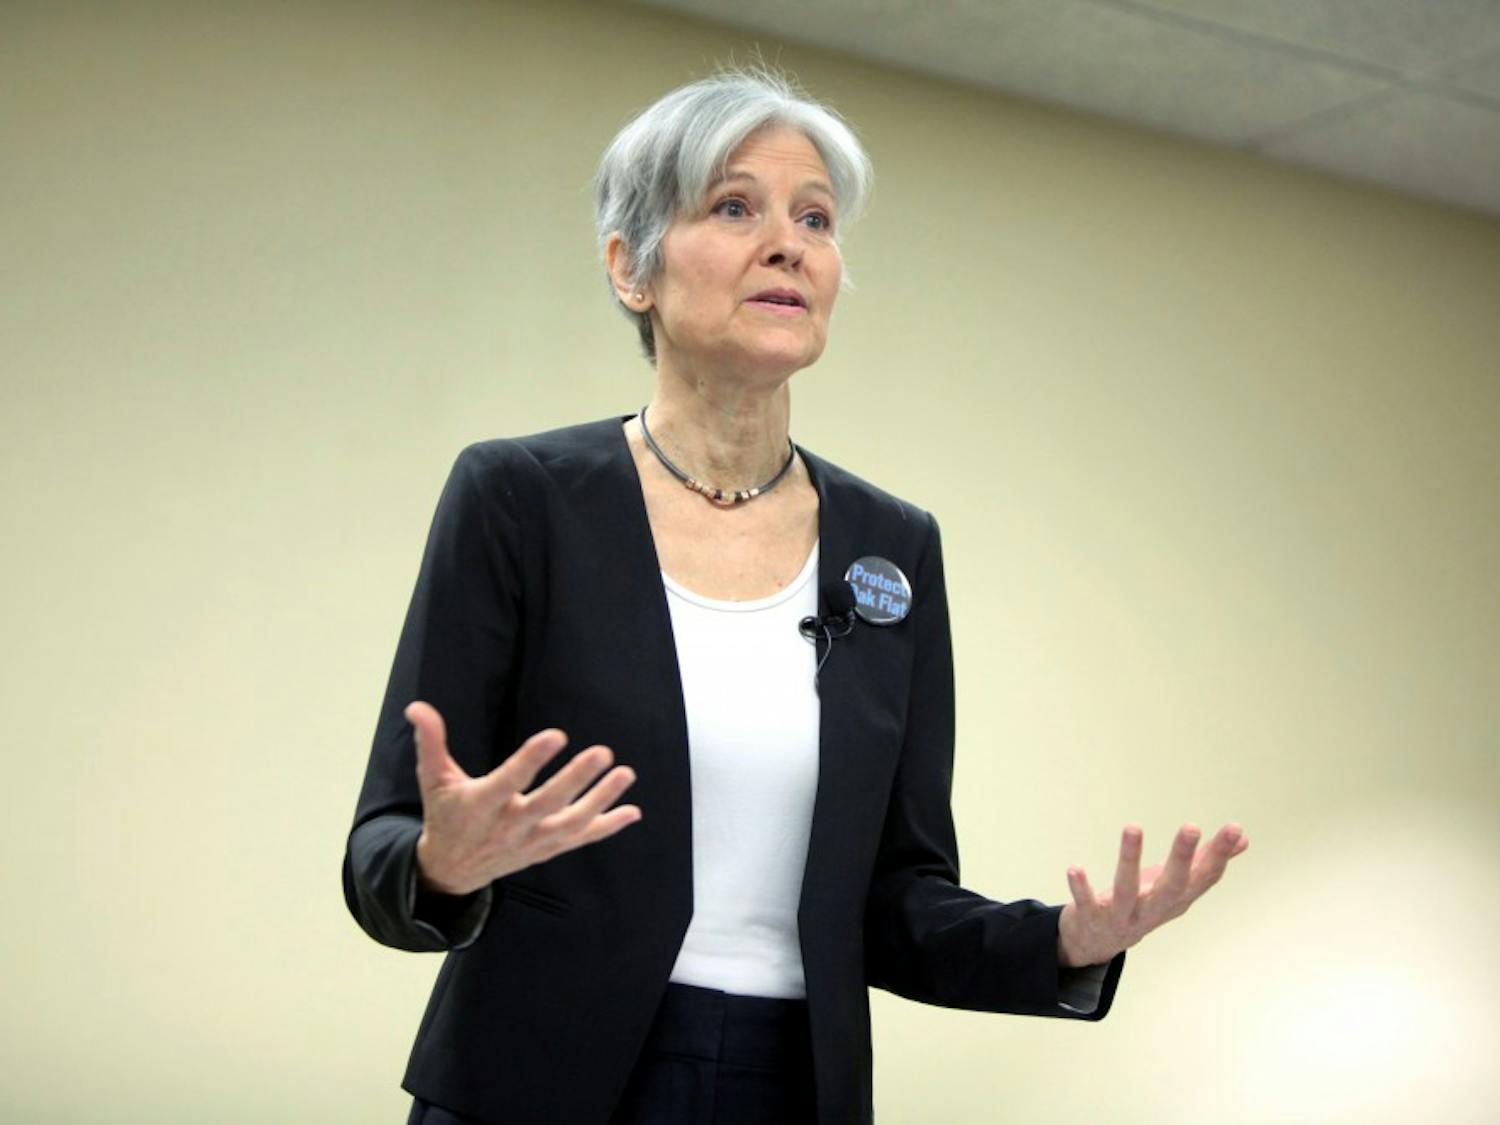 The Athens branch of the&nbsp;International Socialist Organization&nbsp;is supporting&nbsp;Green Party candidate Jill Stein. (Provided via Wikimedia Commons)